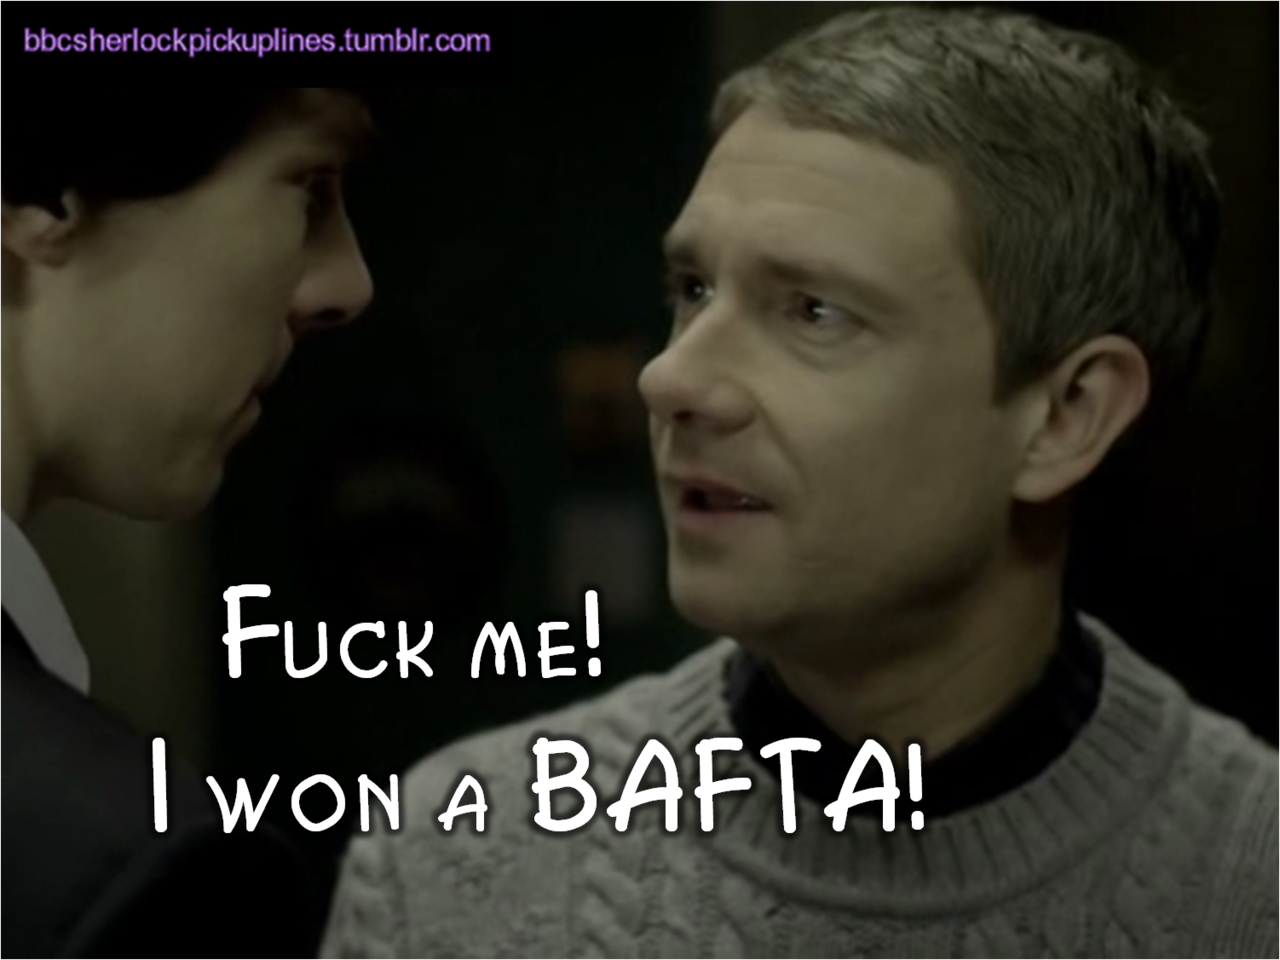 The best of breaking the fourth wall, from BBC Sherlock pick-up lines.